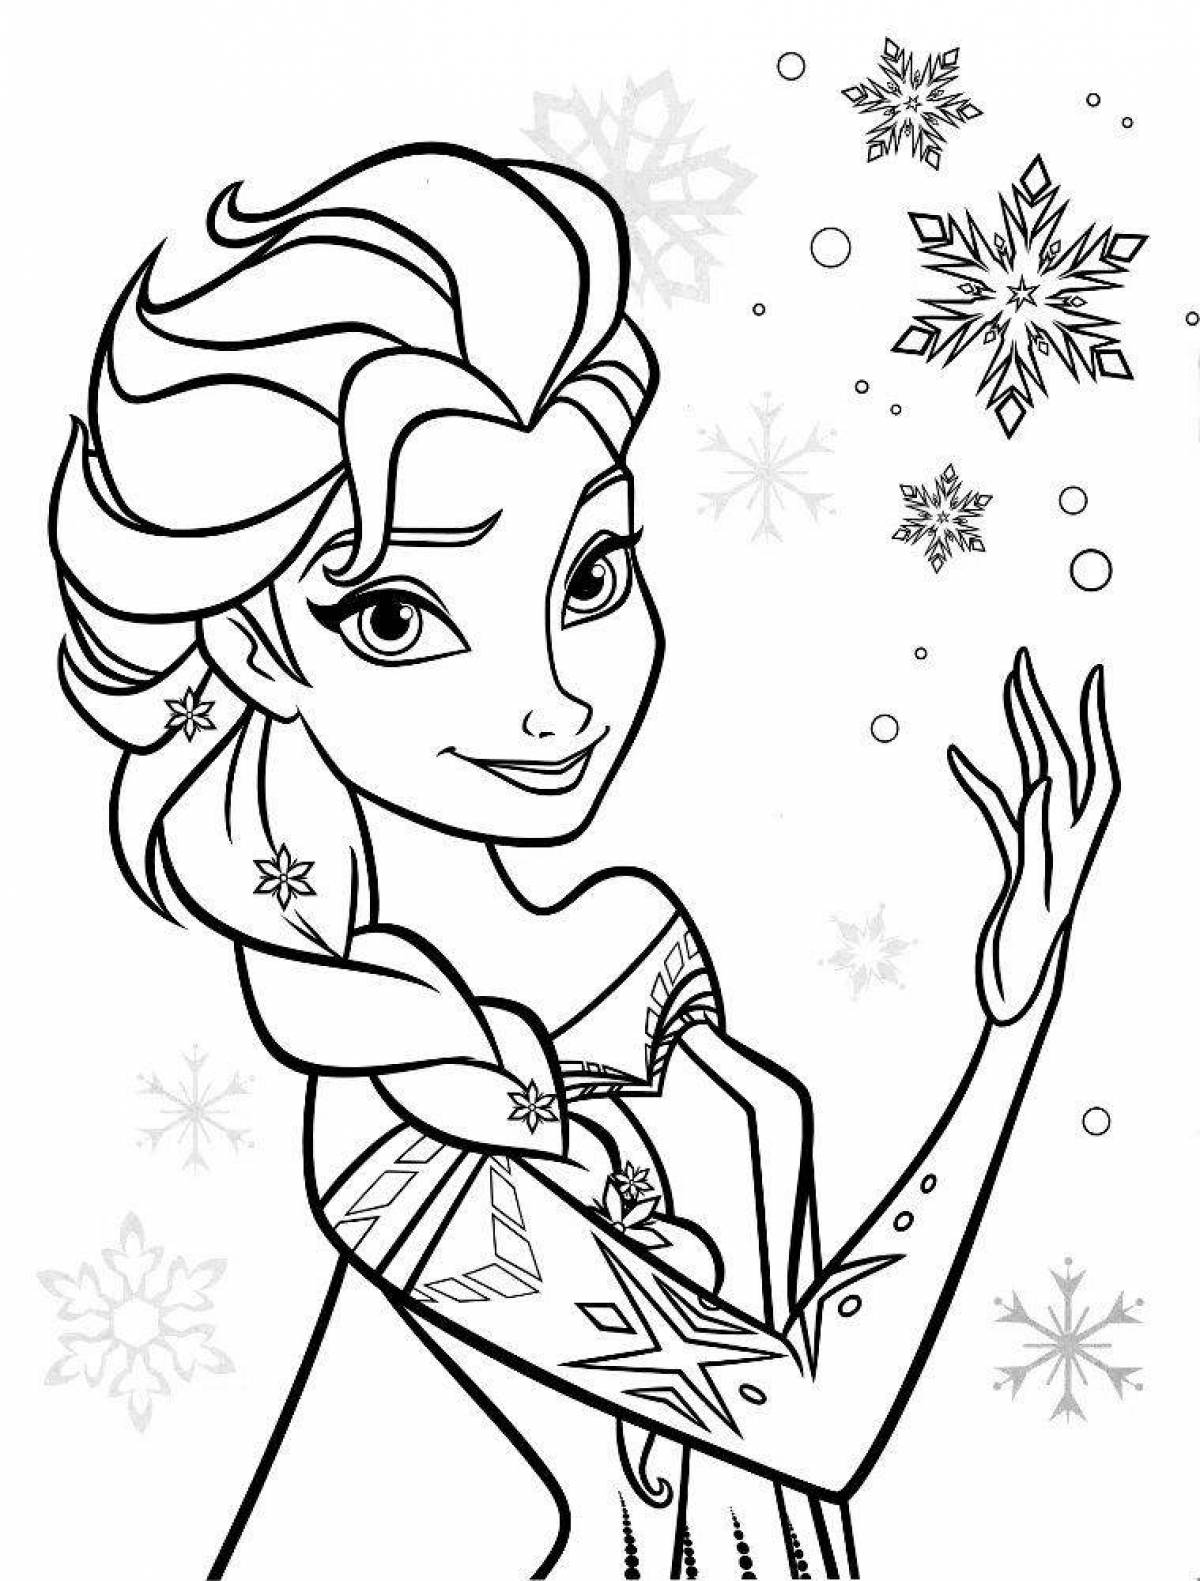 Beautiful Elsa coloring book for 5-6 year olds